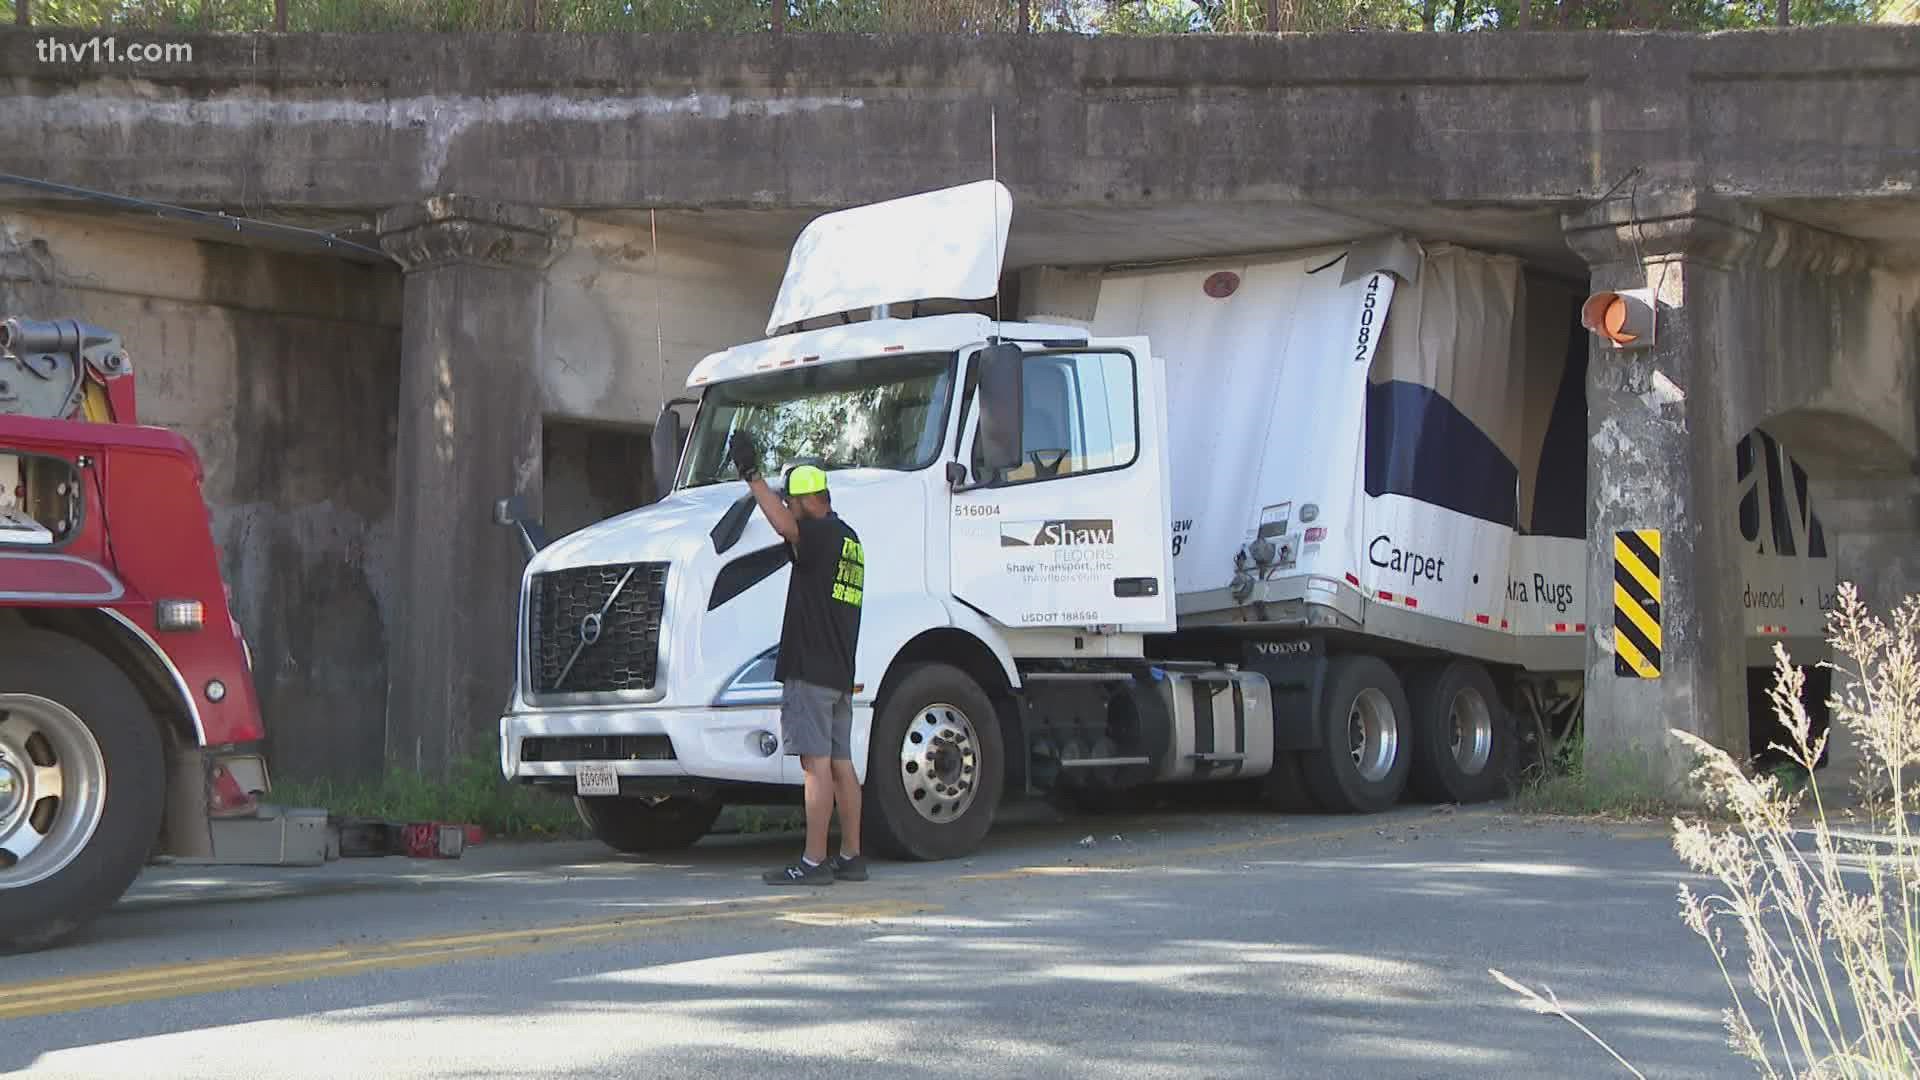 A semi-truck is causing traffic delays after it crashed under a railroad overpass on 6th Street in Little Rock.